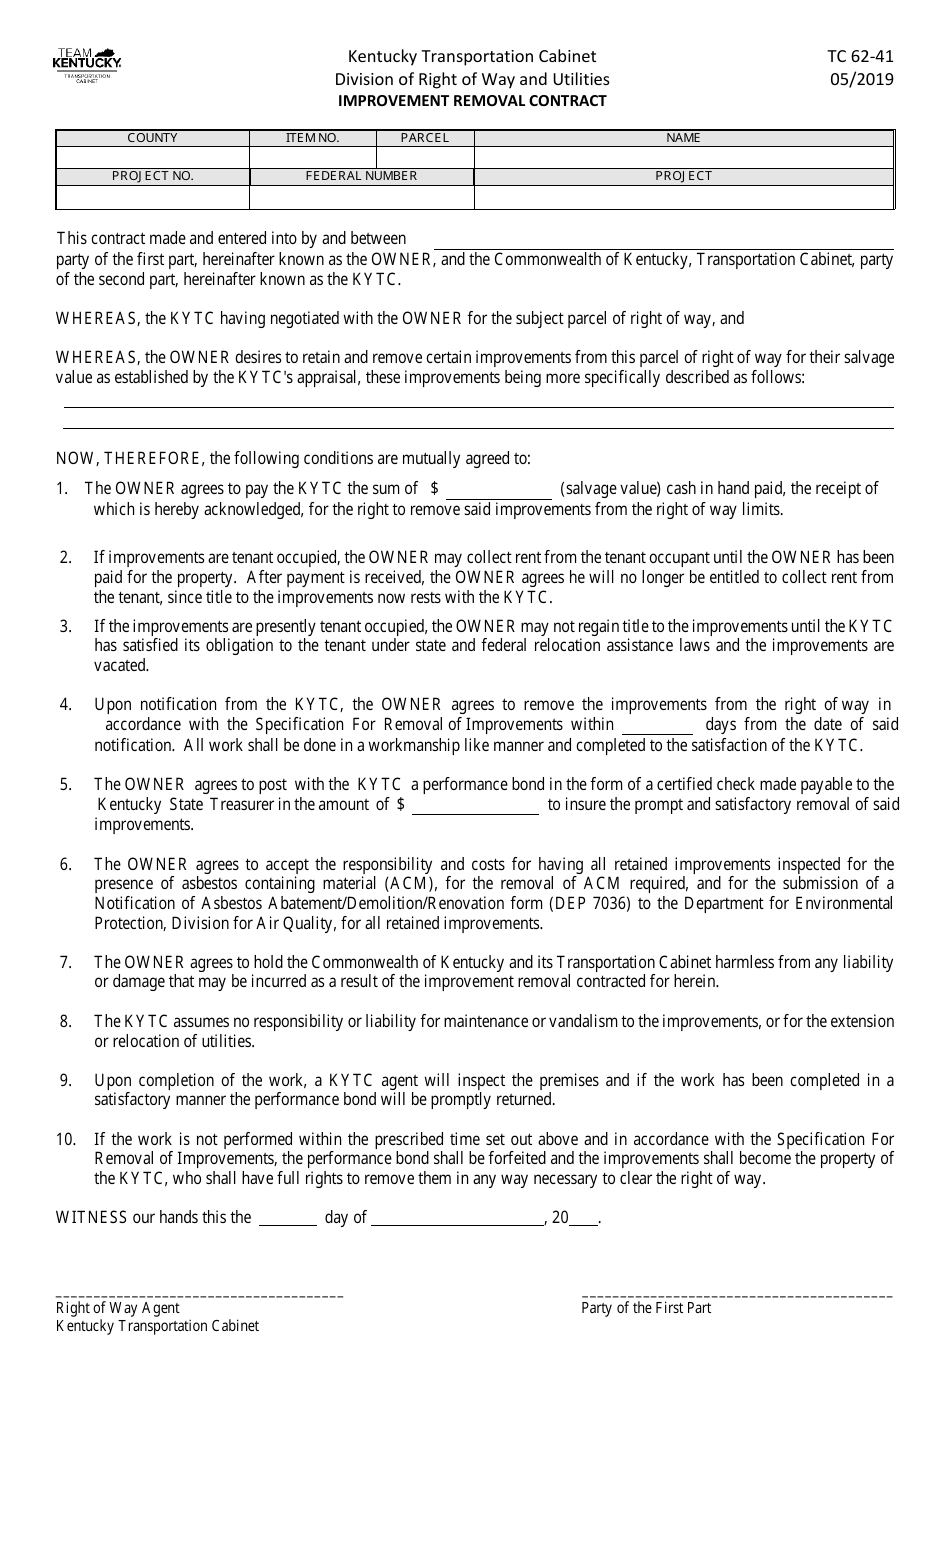 Form TC62-41 Improvement Removal Contract - Kentucky, Page 1